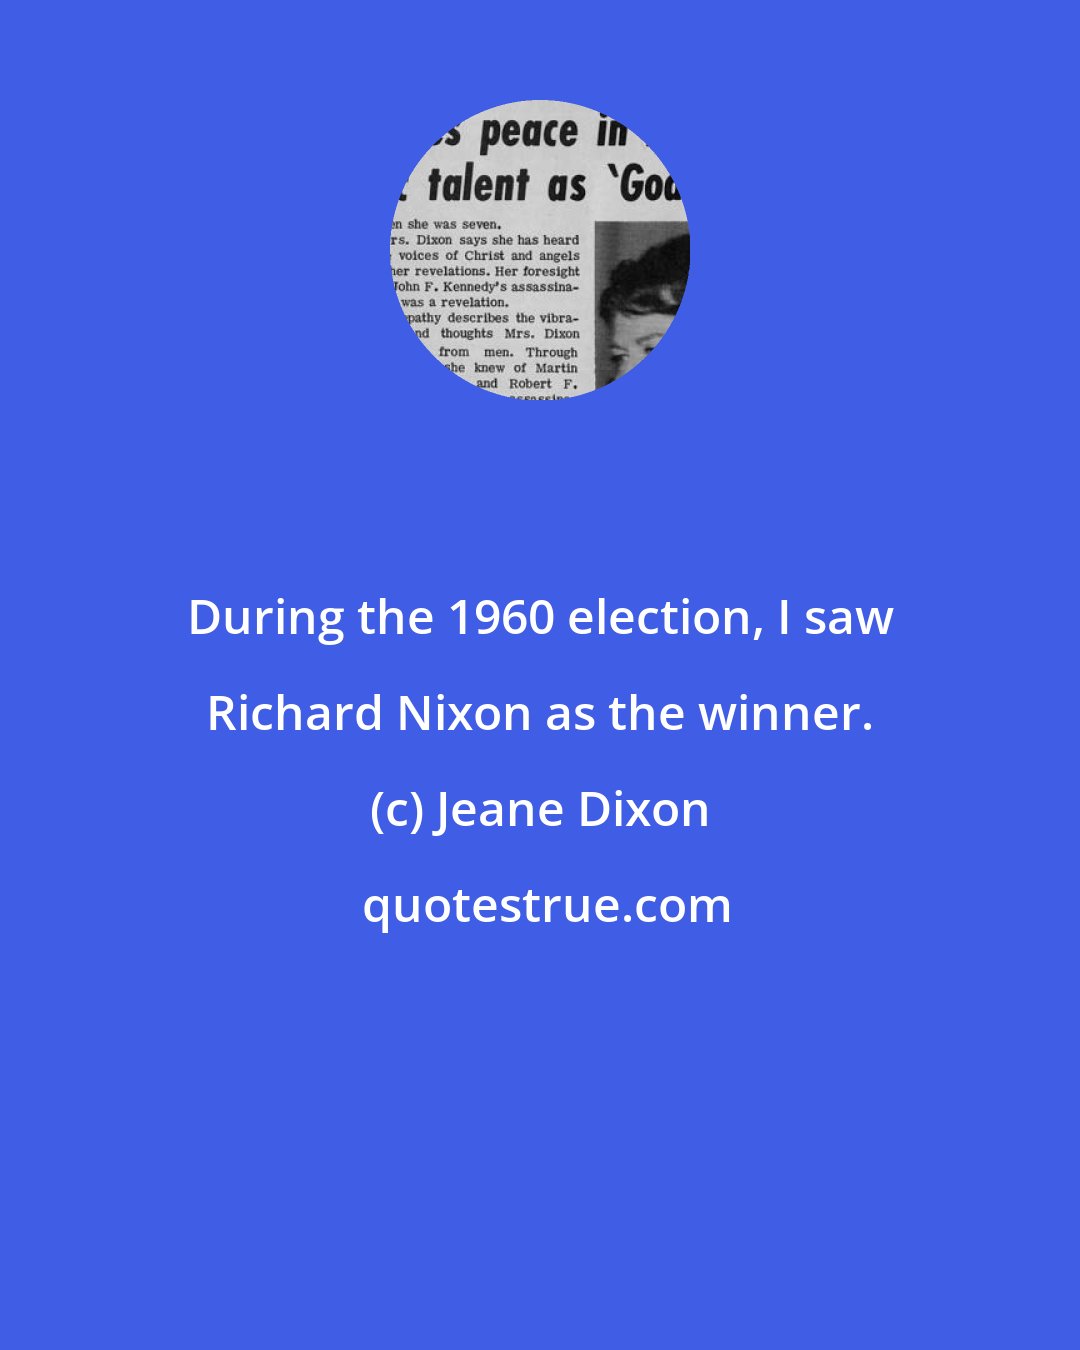 Jeane Dixon: During the 1960 election, I saw Richard Nixon as the winner.